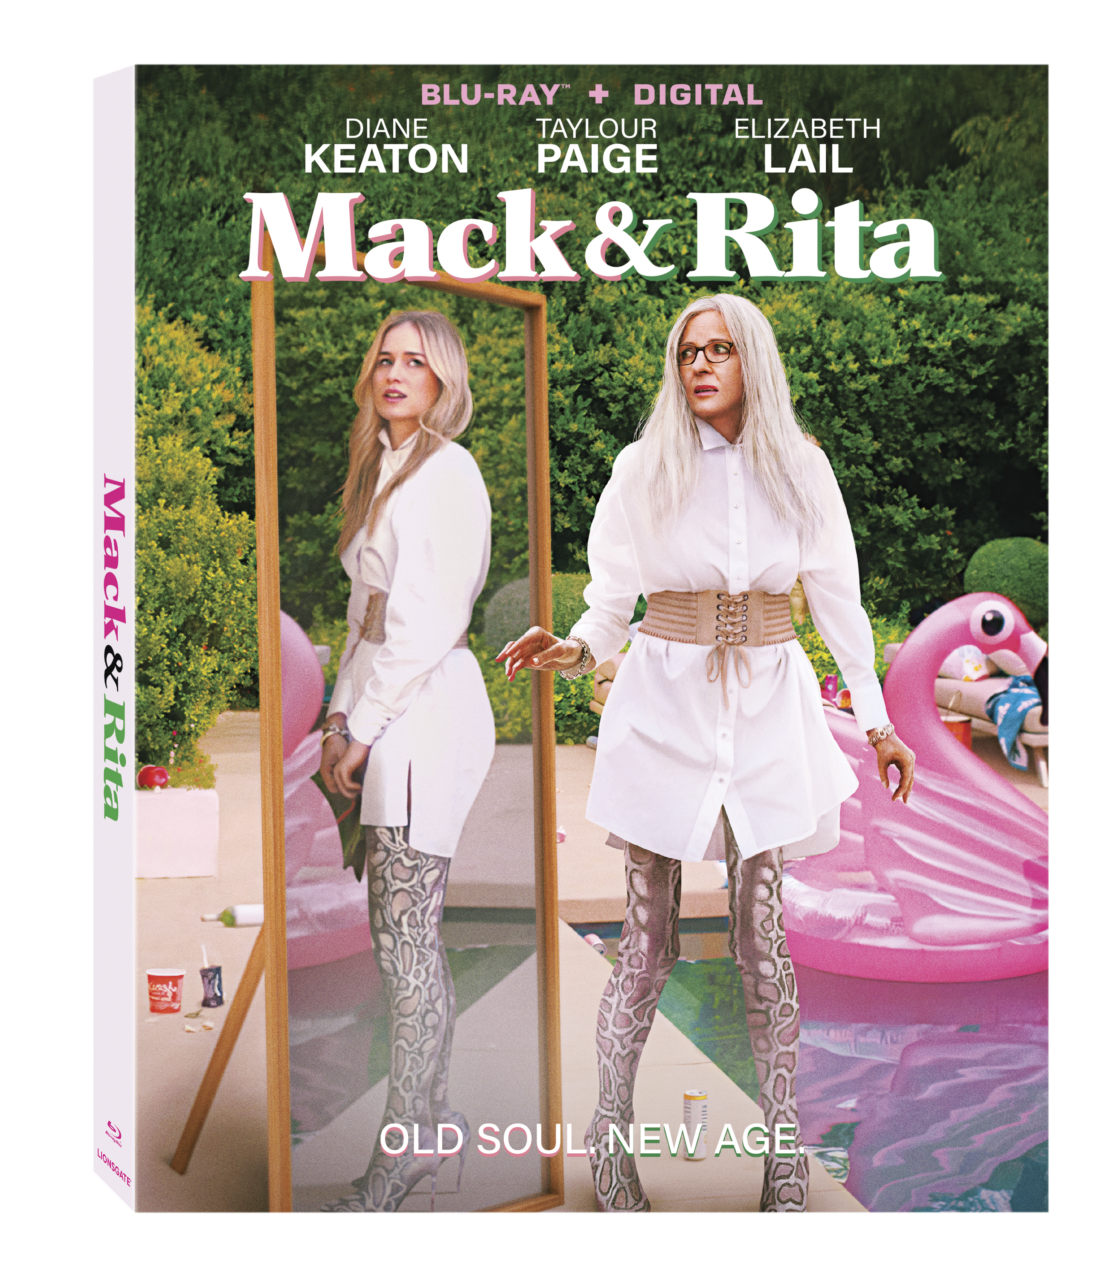 Mack And Rita Blu-Ray Combo Pack cover (Lionsgate)